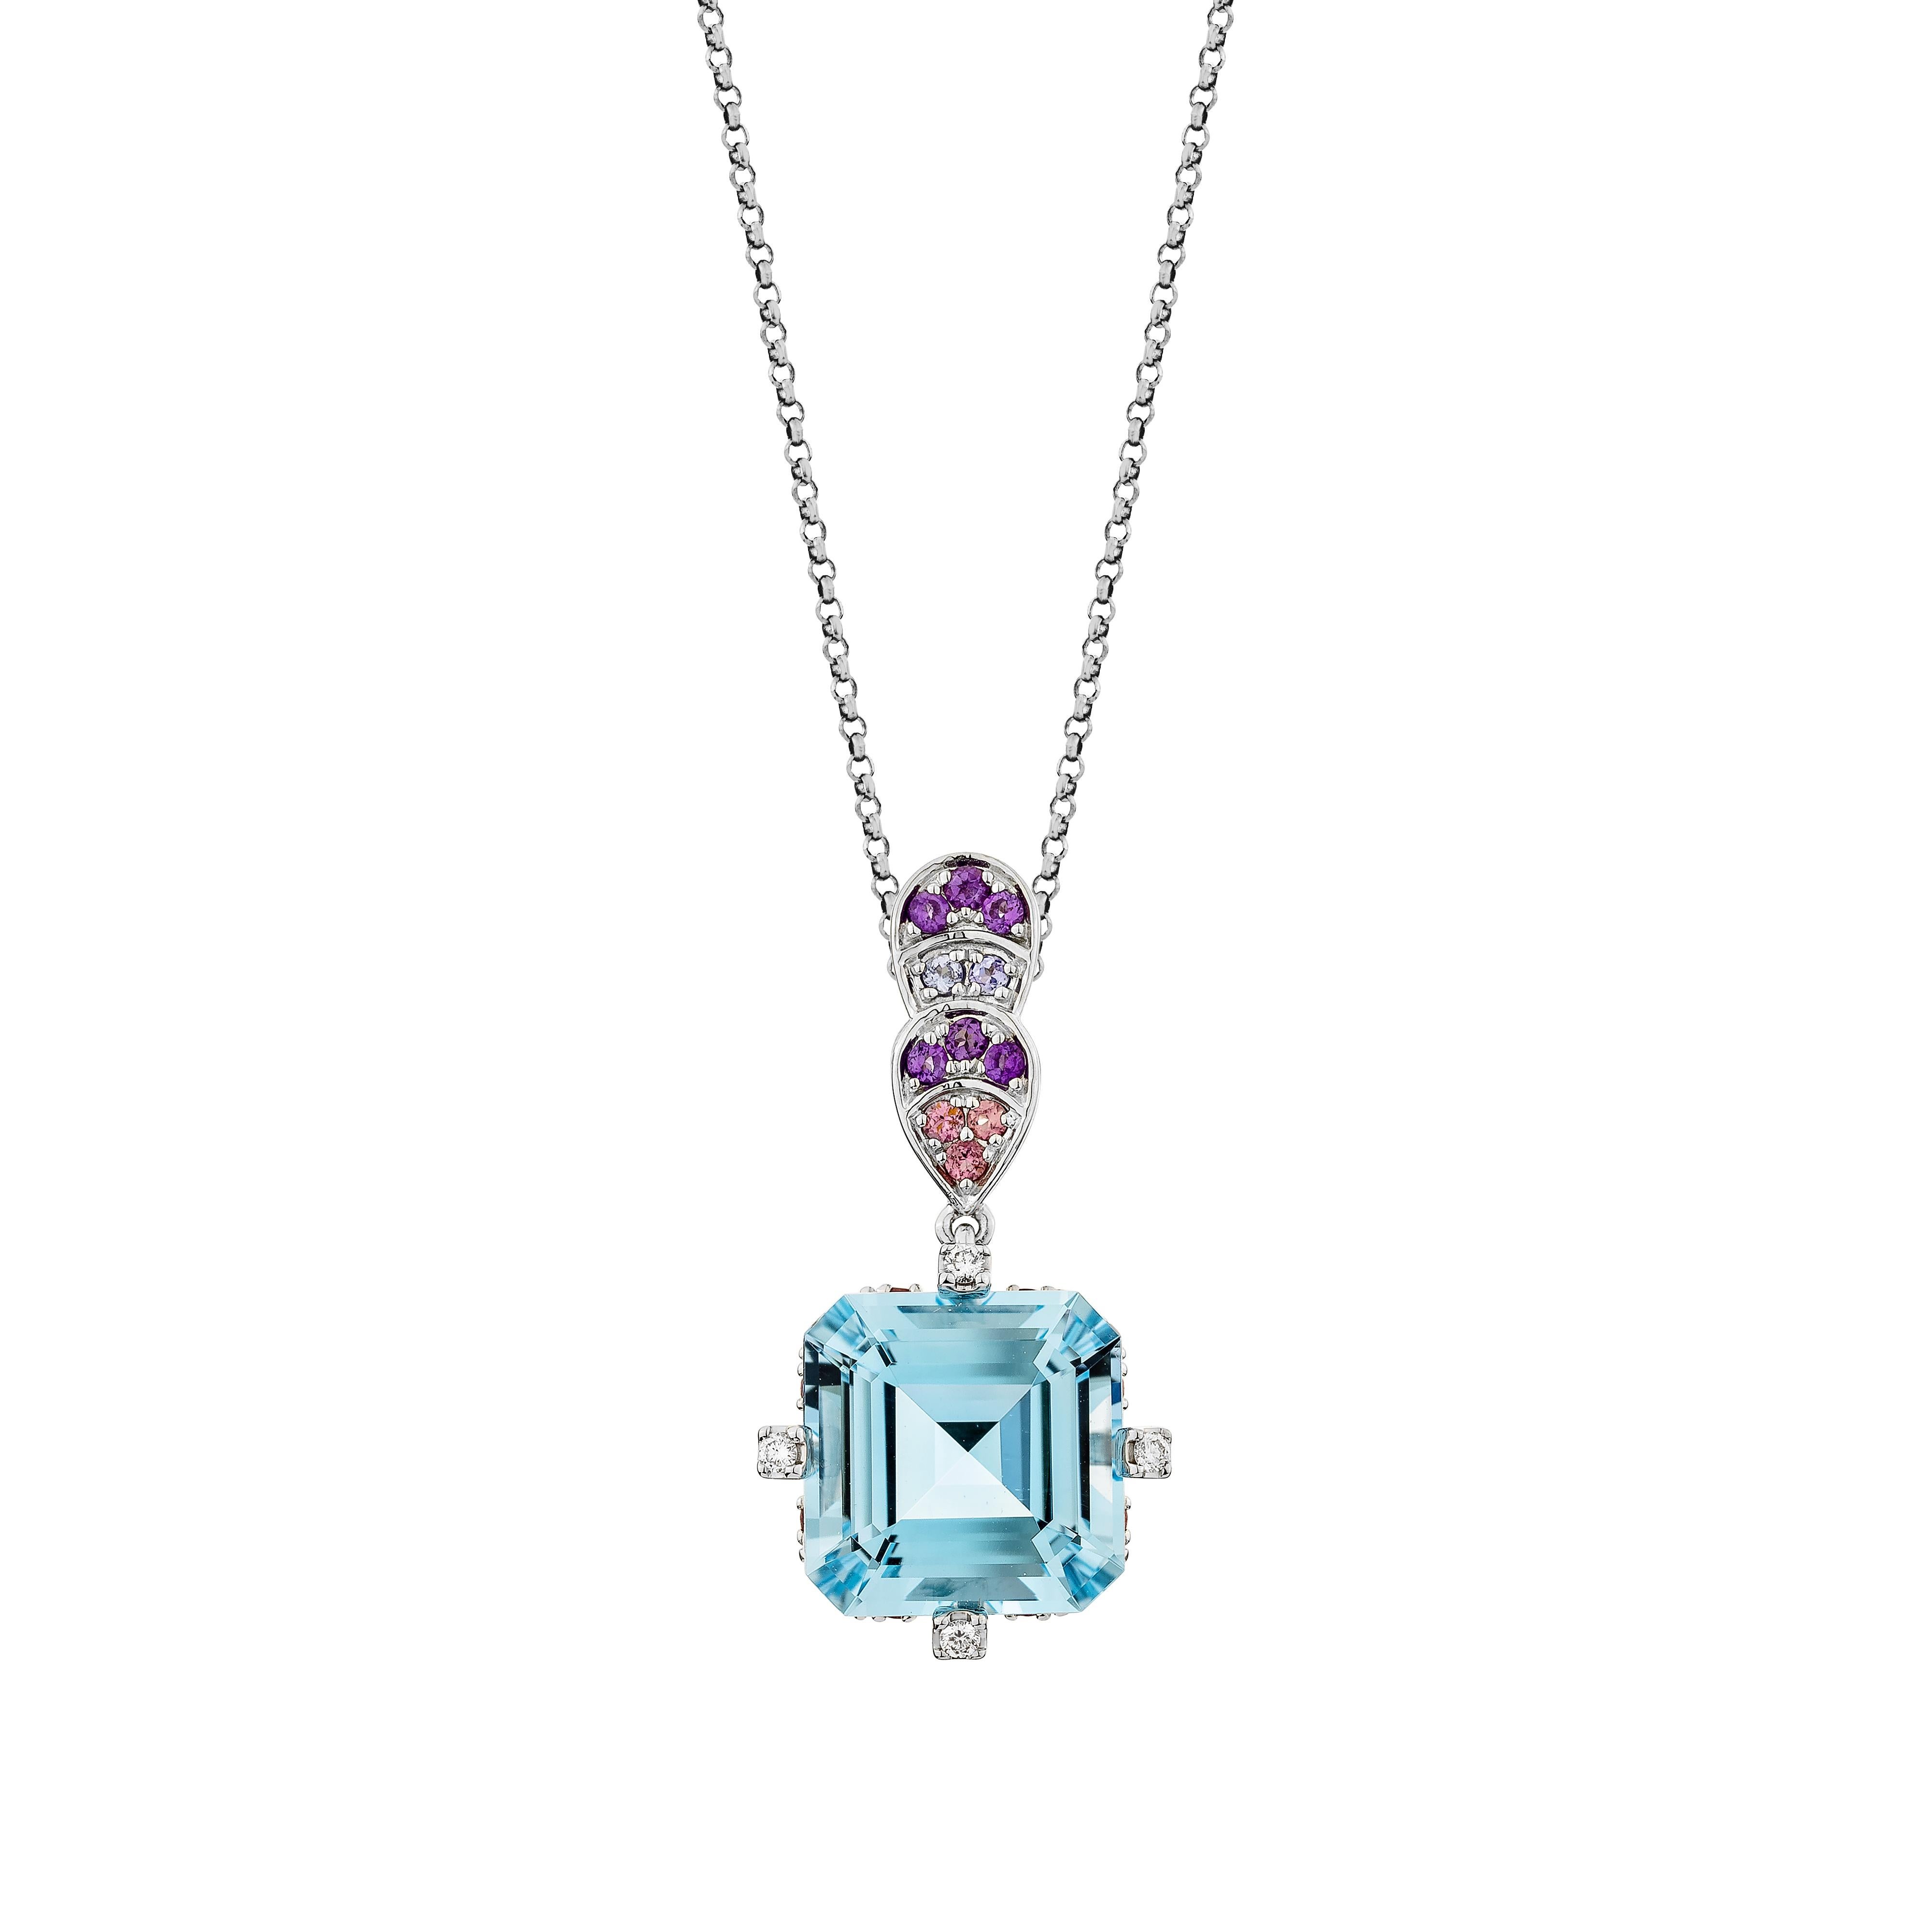 Contemporary 9.25 Carat Swiss Blue Topaz Pendant in 18KWG with Multi Gemstone and Diamond. For Sale